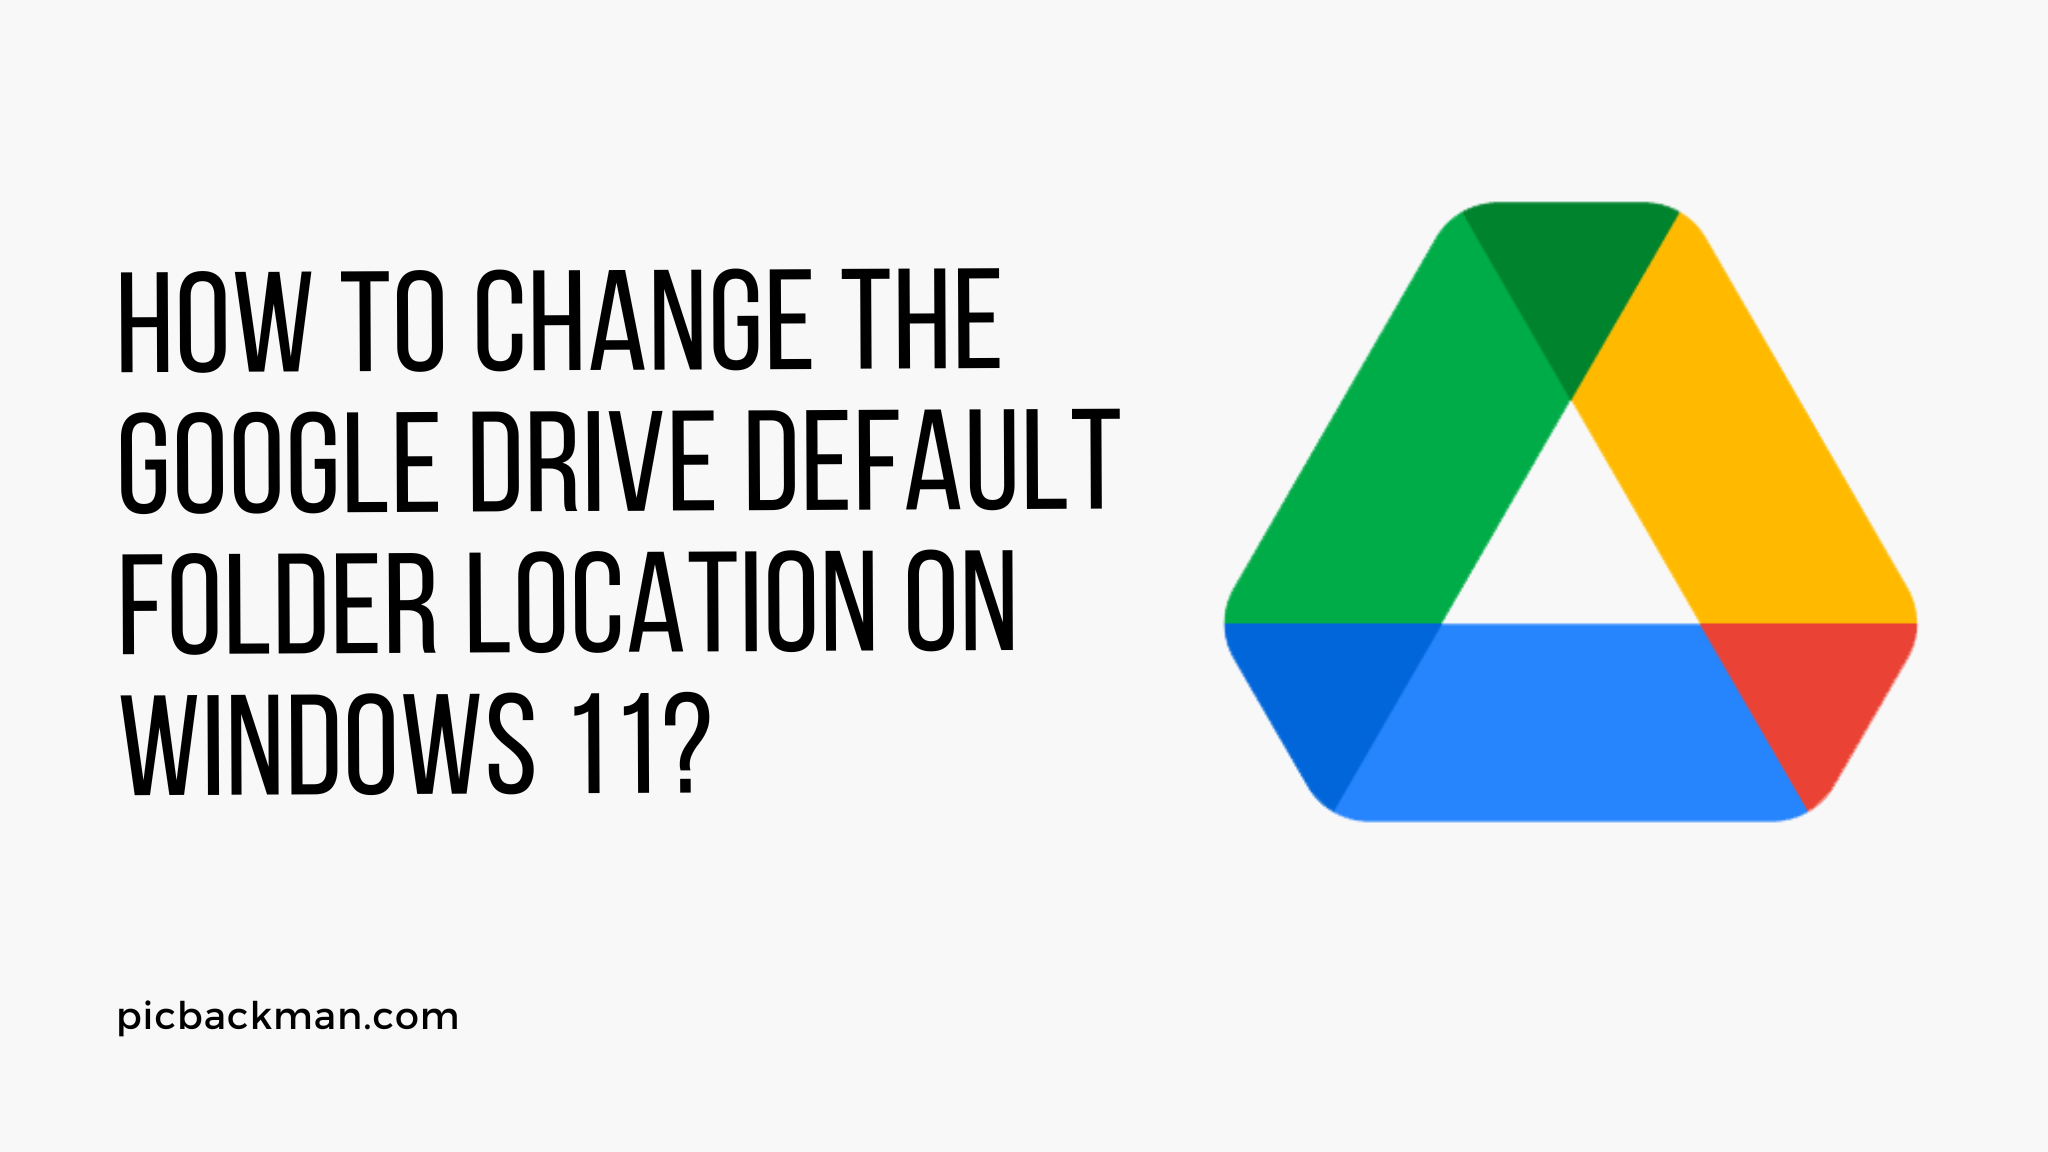 How to Change the Google Drive Default Folder Location on Windows?